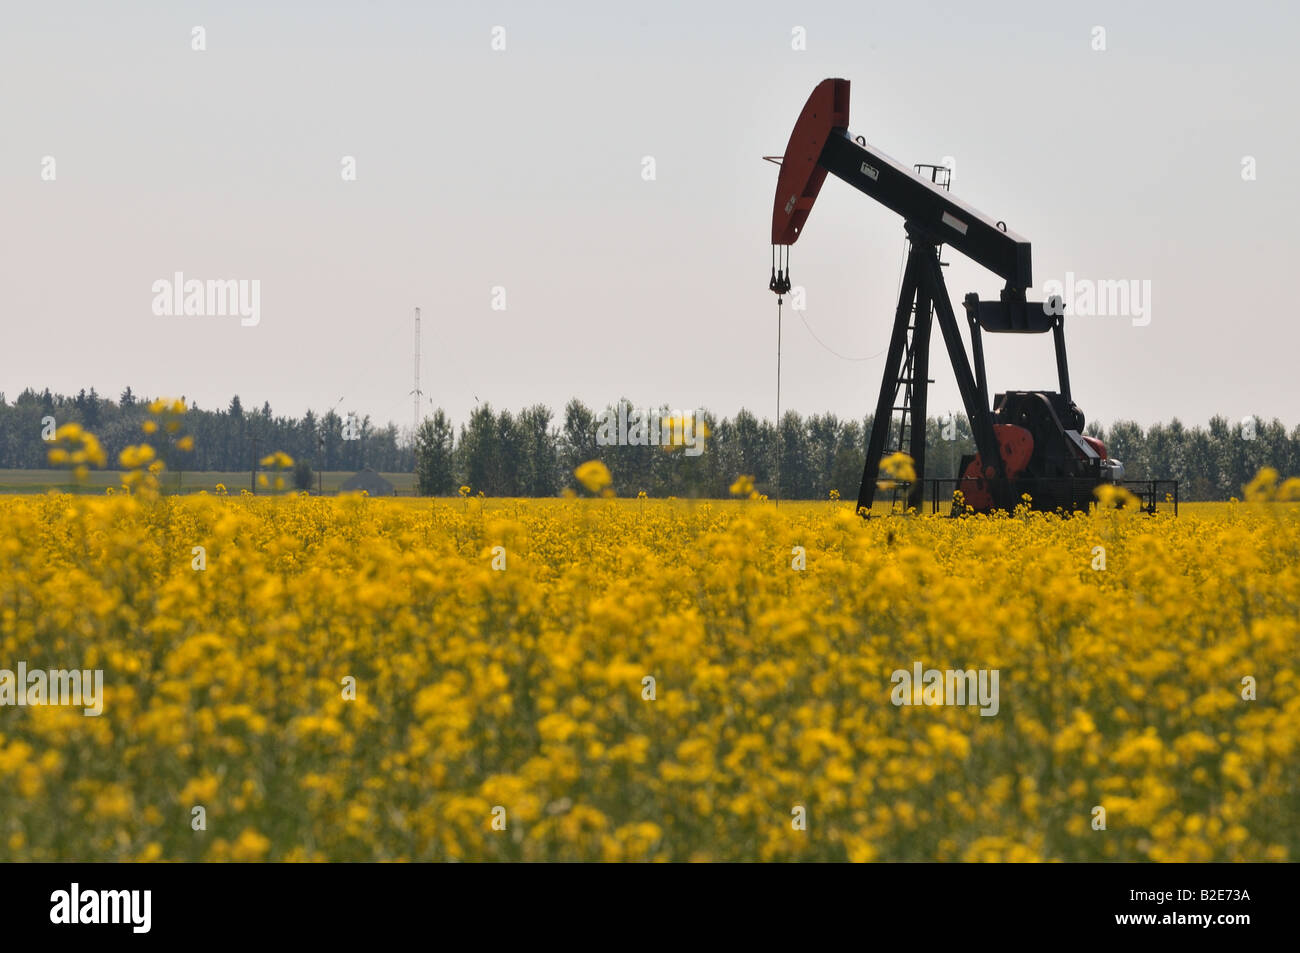 An oil pump jack in a canola field Stock Photo